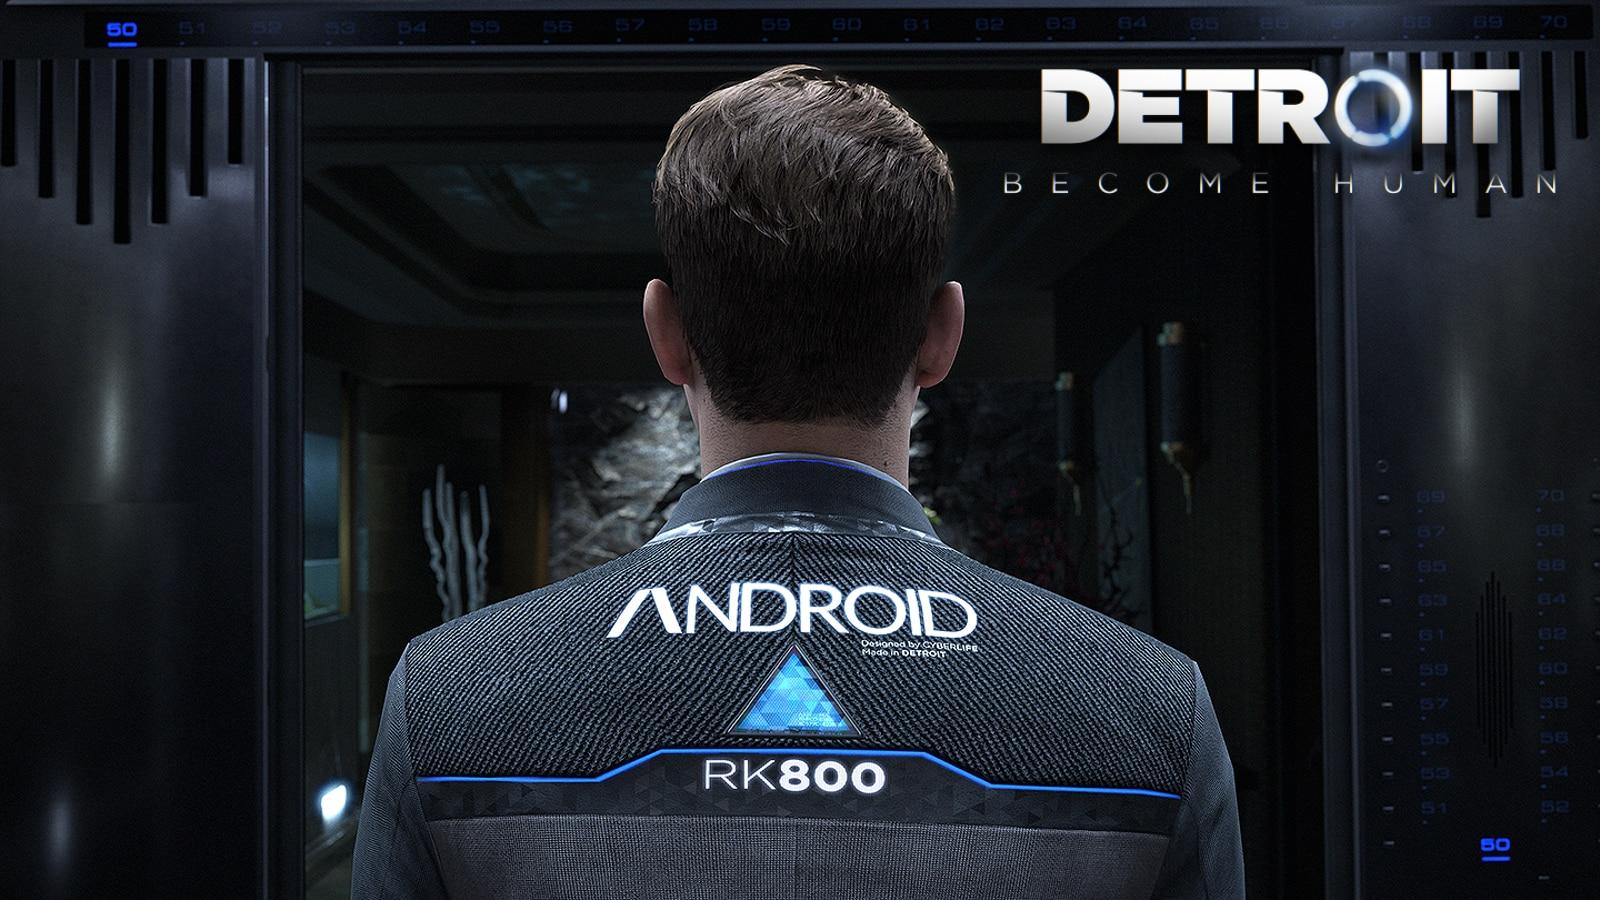 detroit become human male android with logo on jacket with back to camera